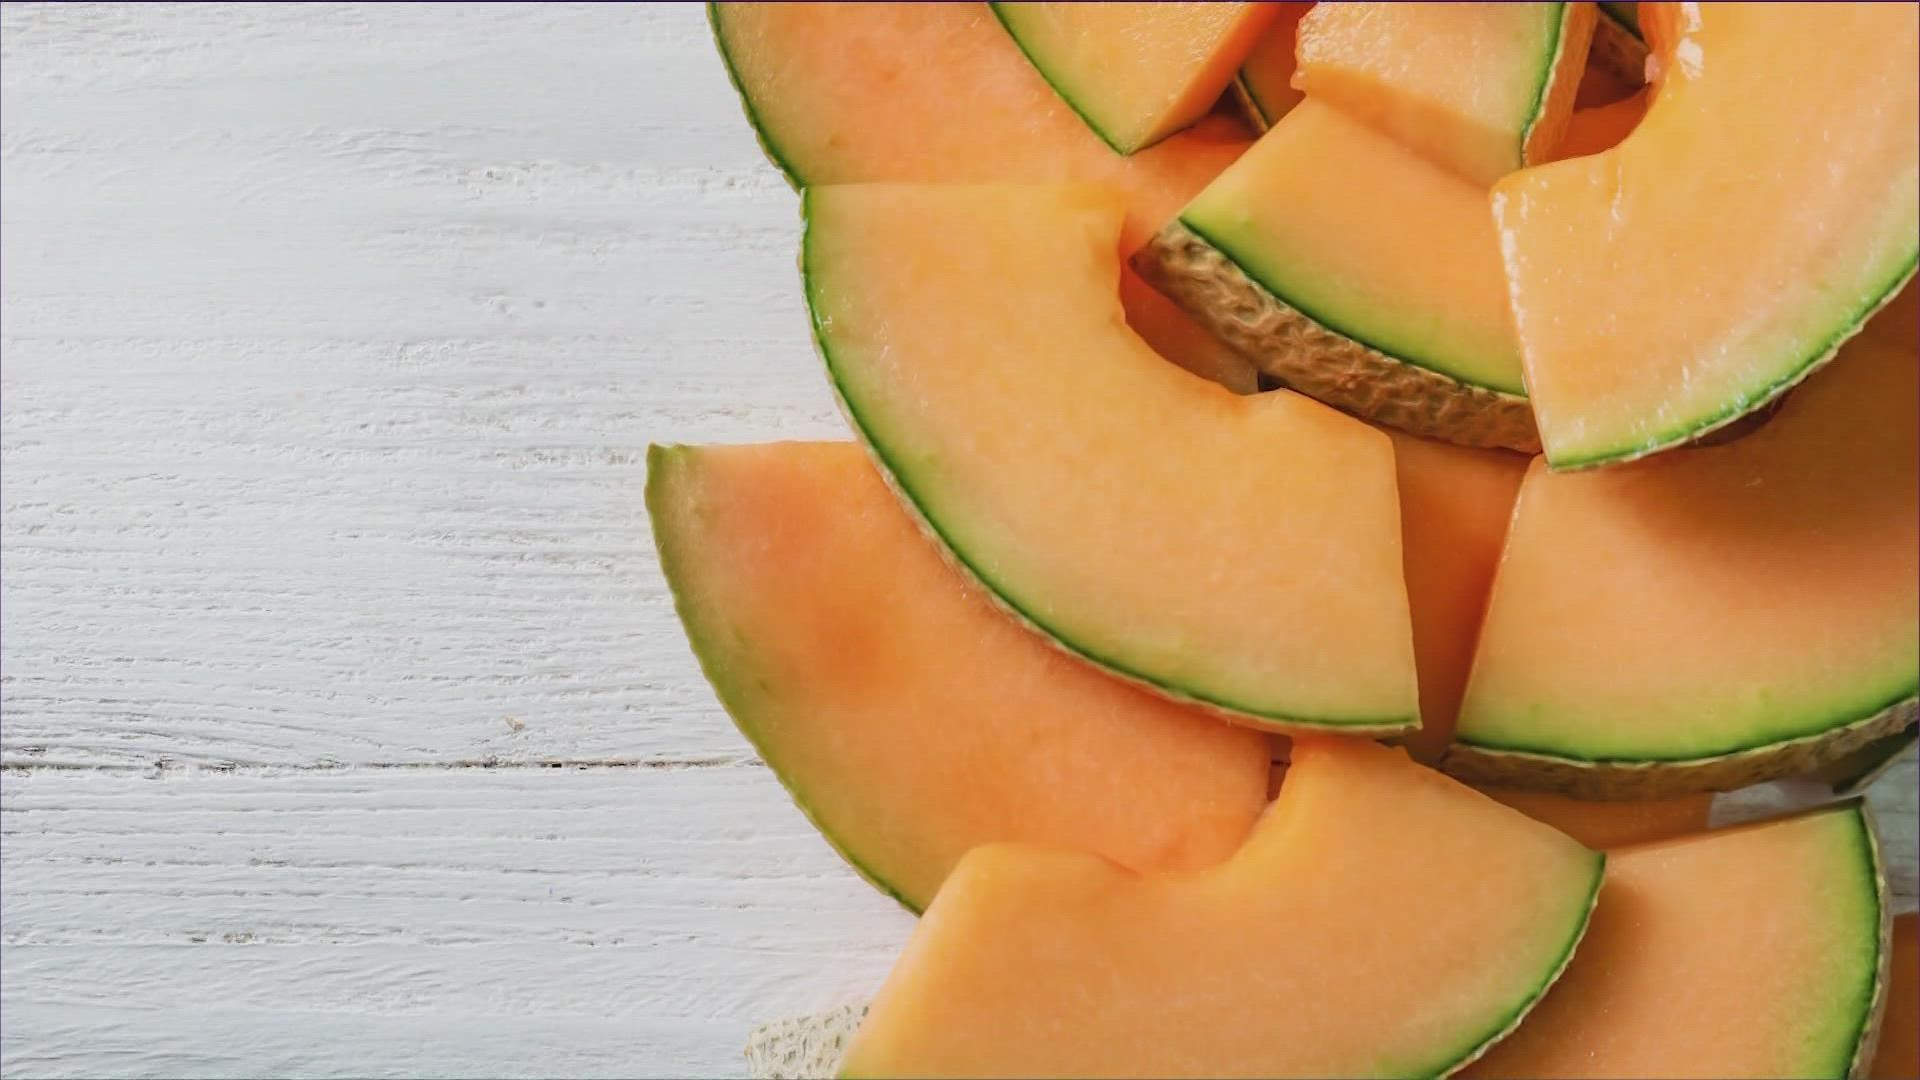 Experts say Texas melons are expected to be extra sweet due to dry weather.